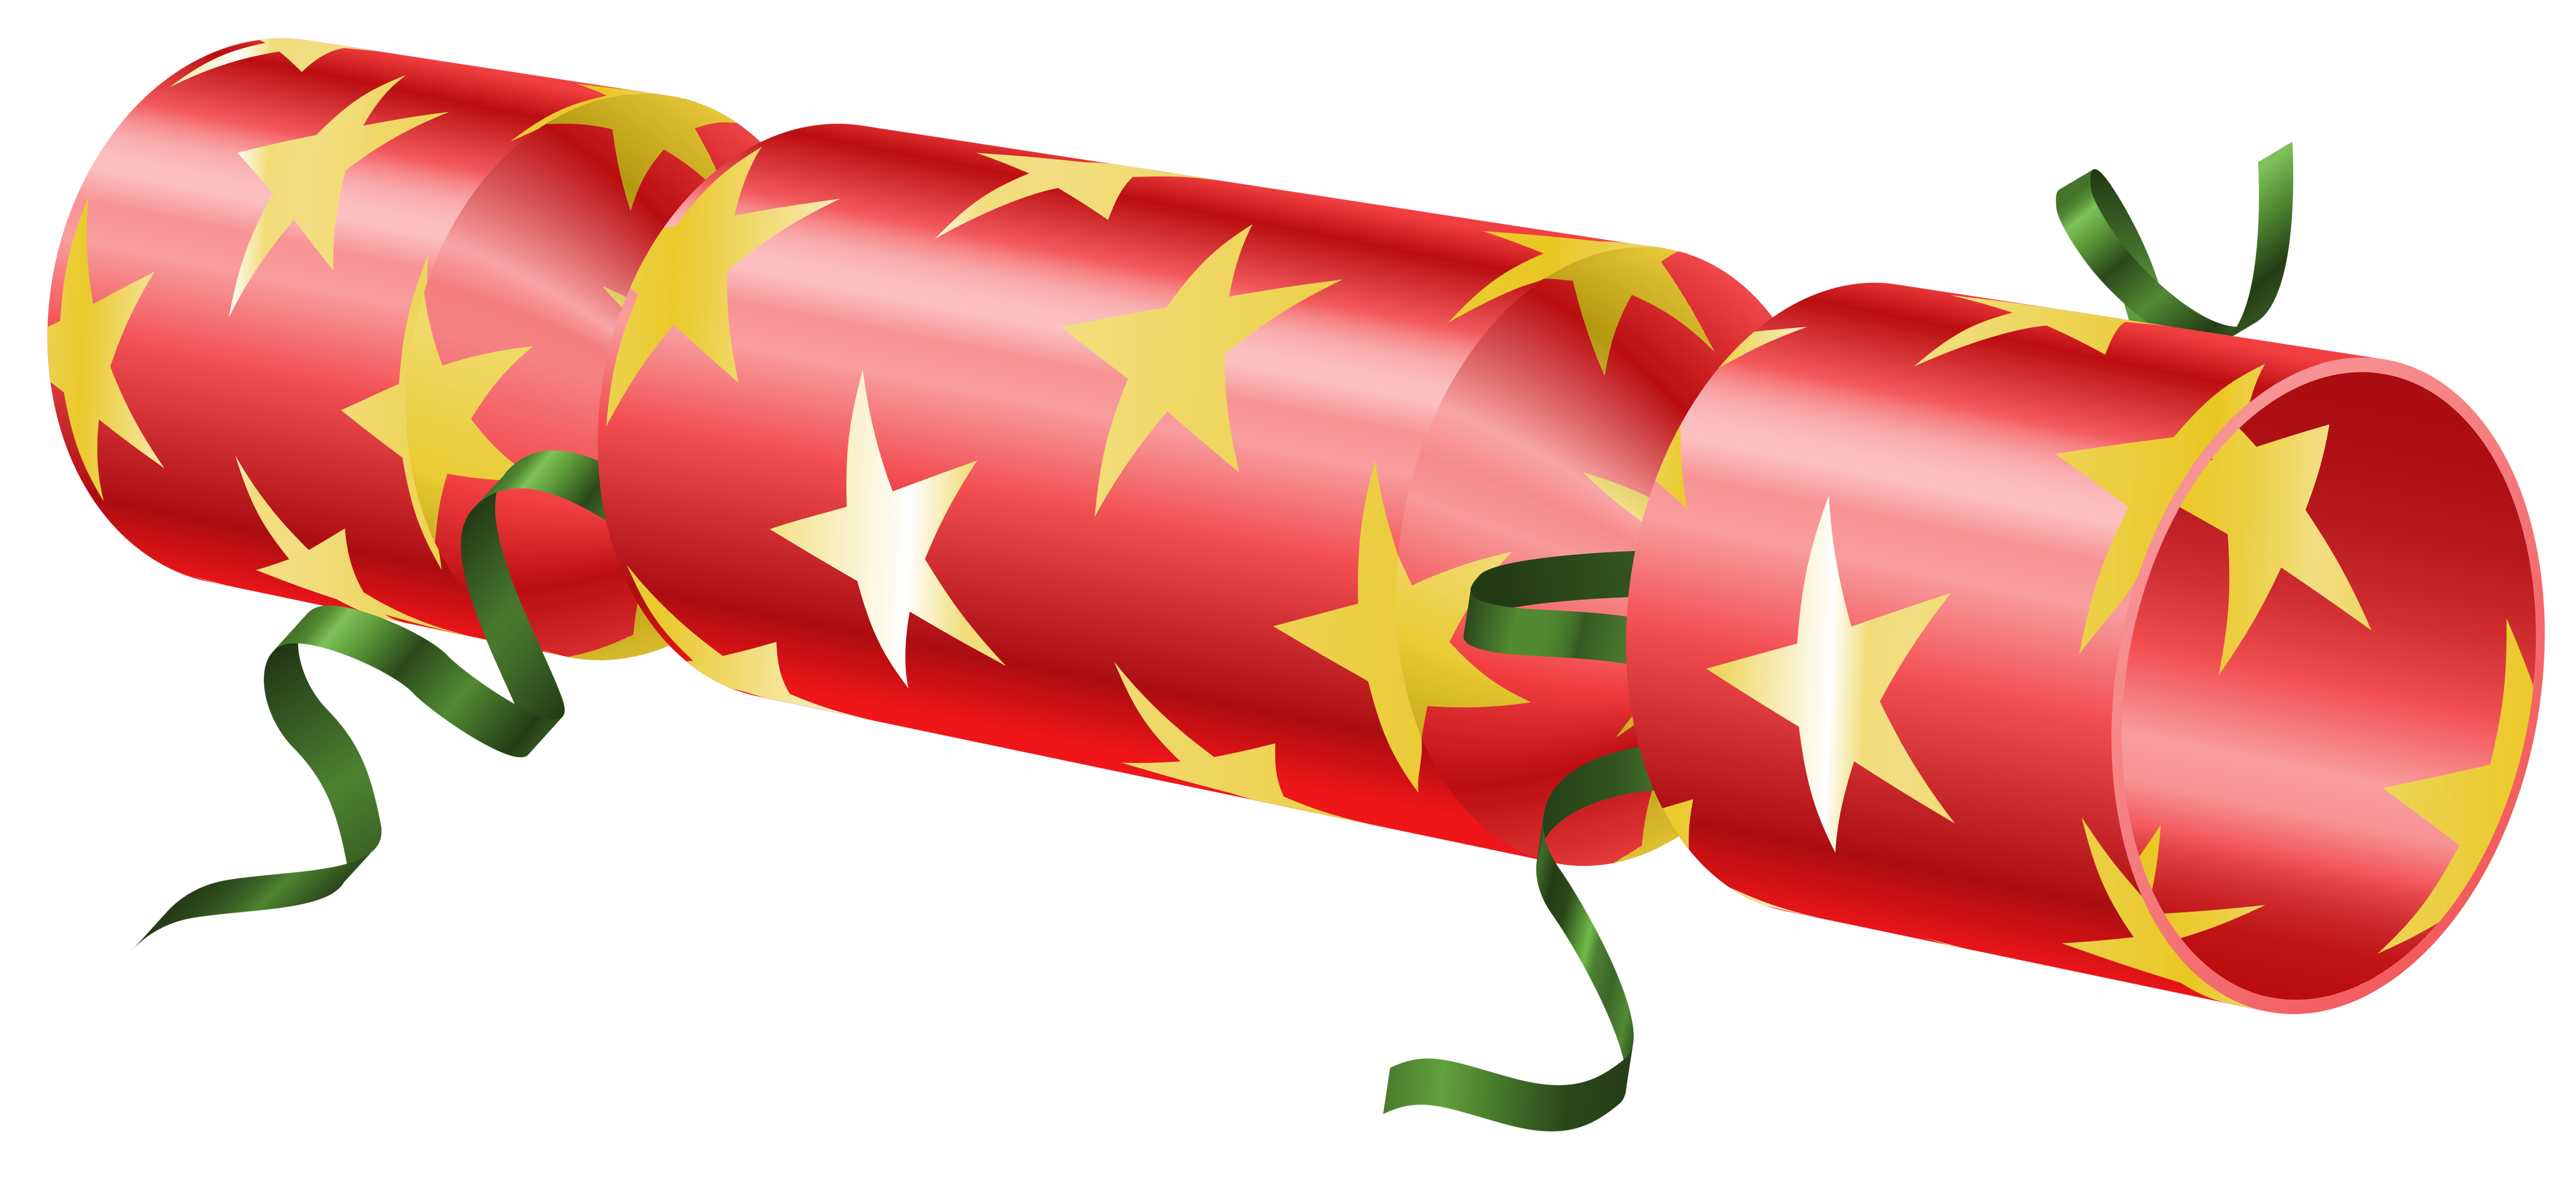 Pepper clipart happy. Christmas cracker png image